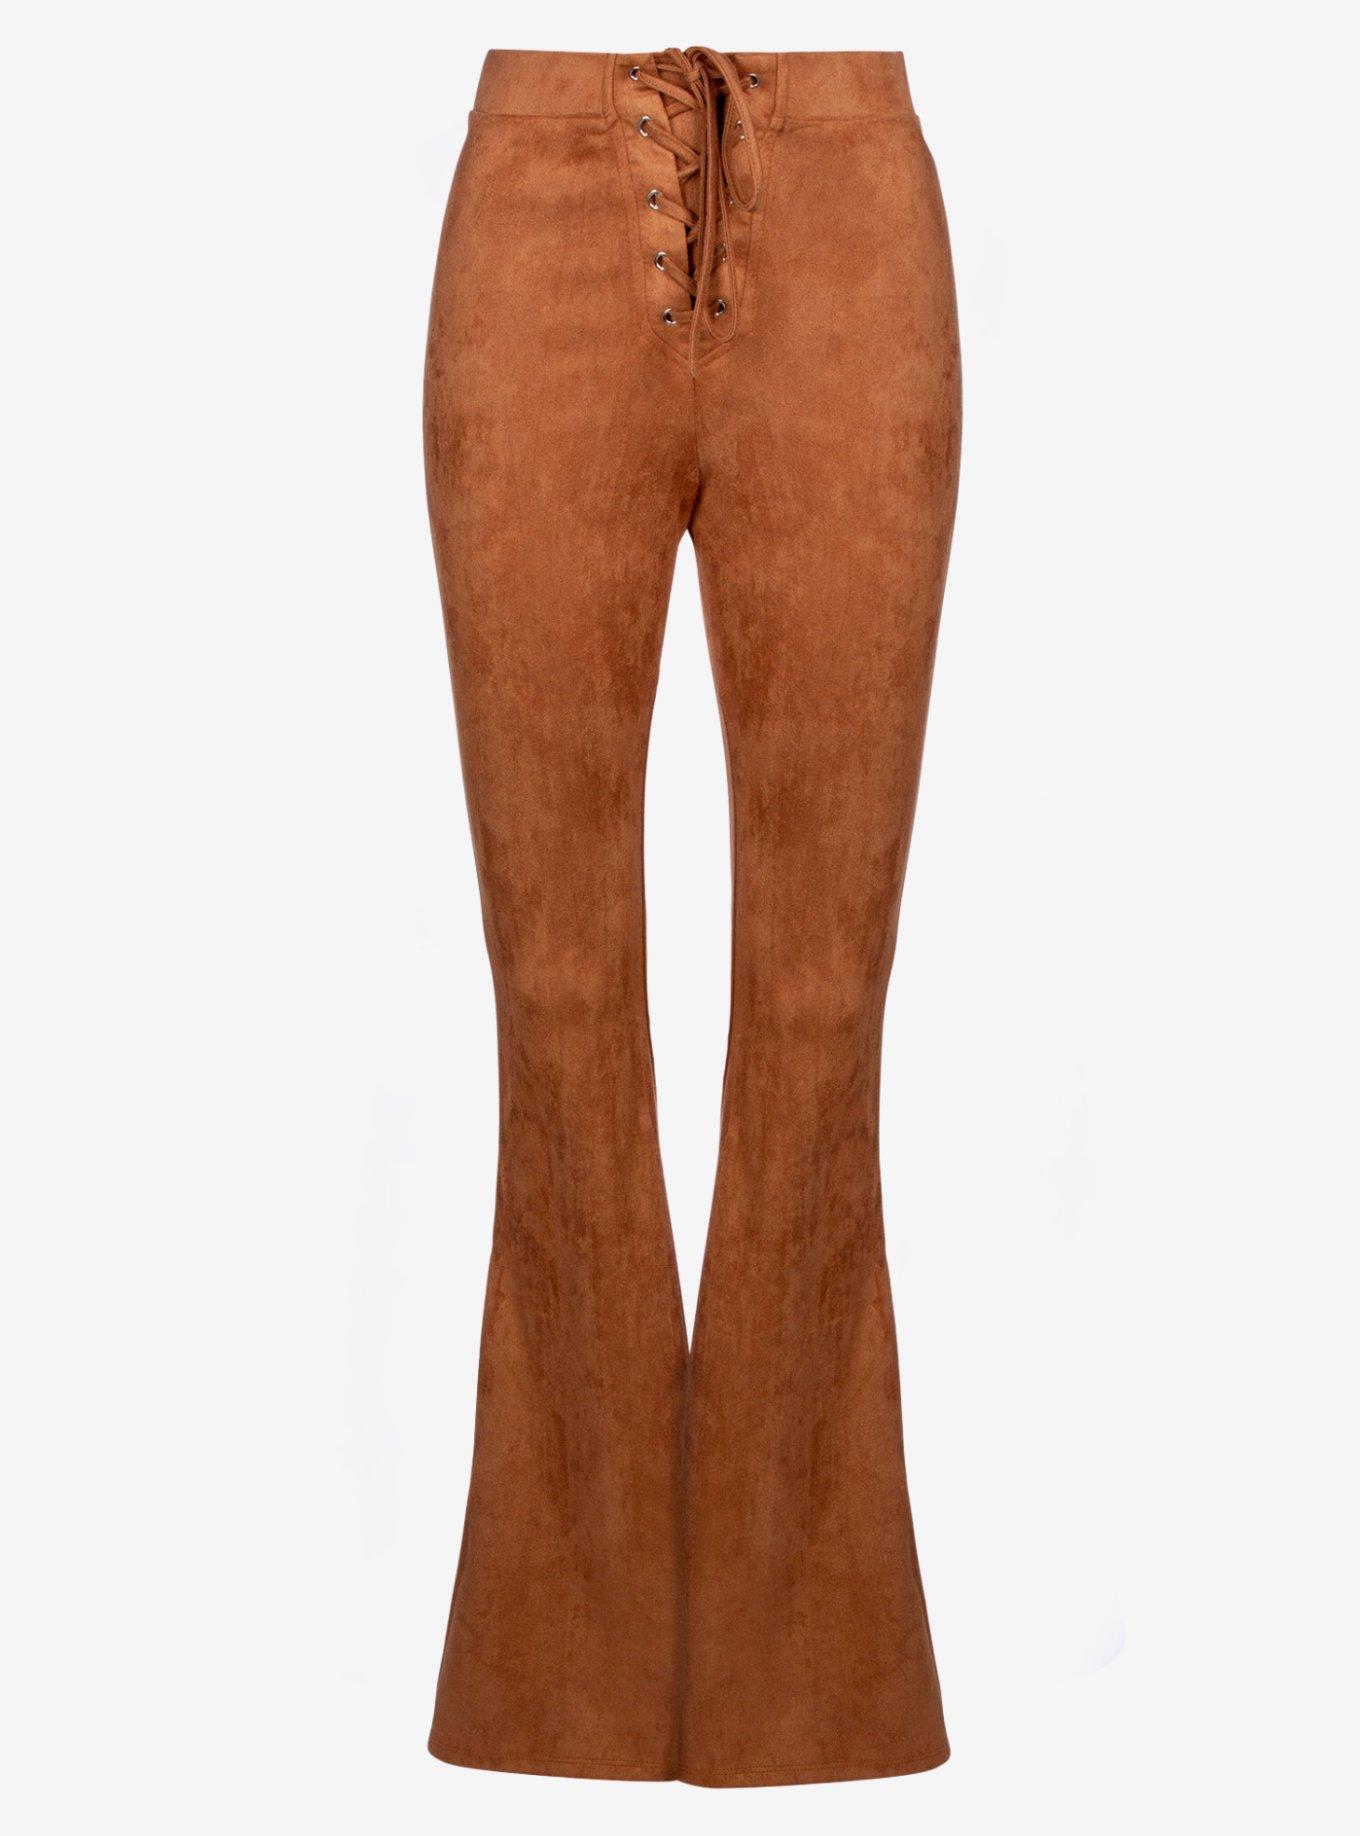 Brown Faux Suede Bell Bottom Flare Pants | Hot Topic